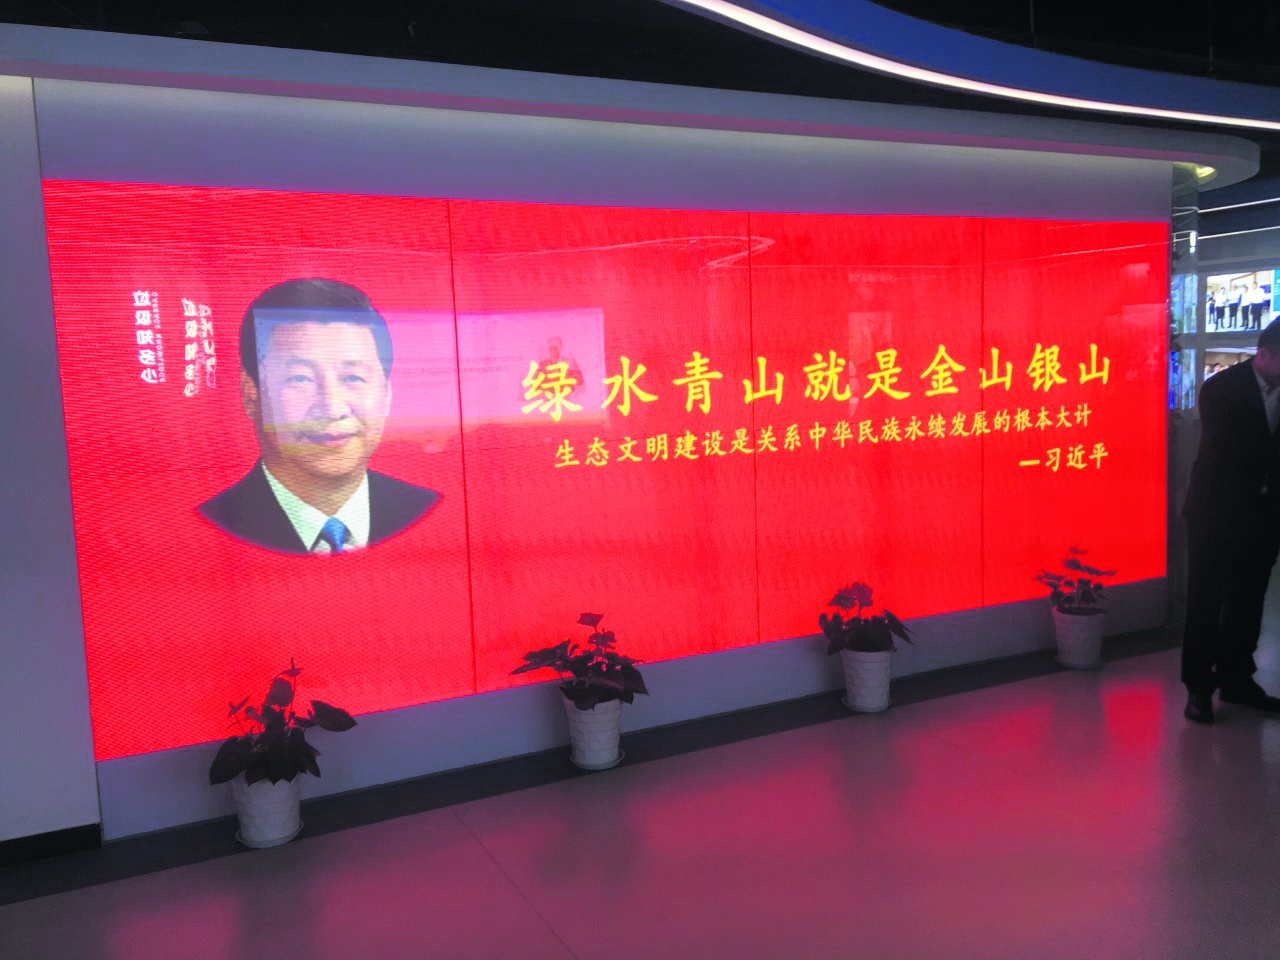 The Dream Time Start-up Incubator - the quote from Xi Jinping reads "lucid waters and lush mountains are invaluable assets"  (from one of his keynote speeches on the importance of and commitment